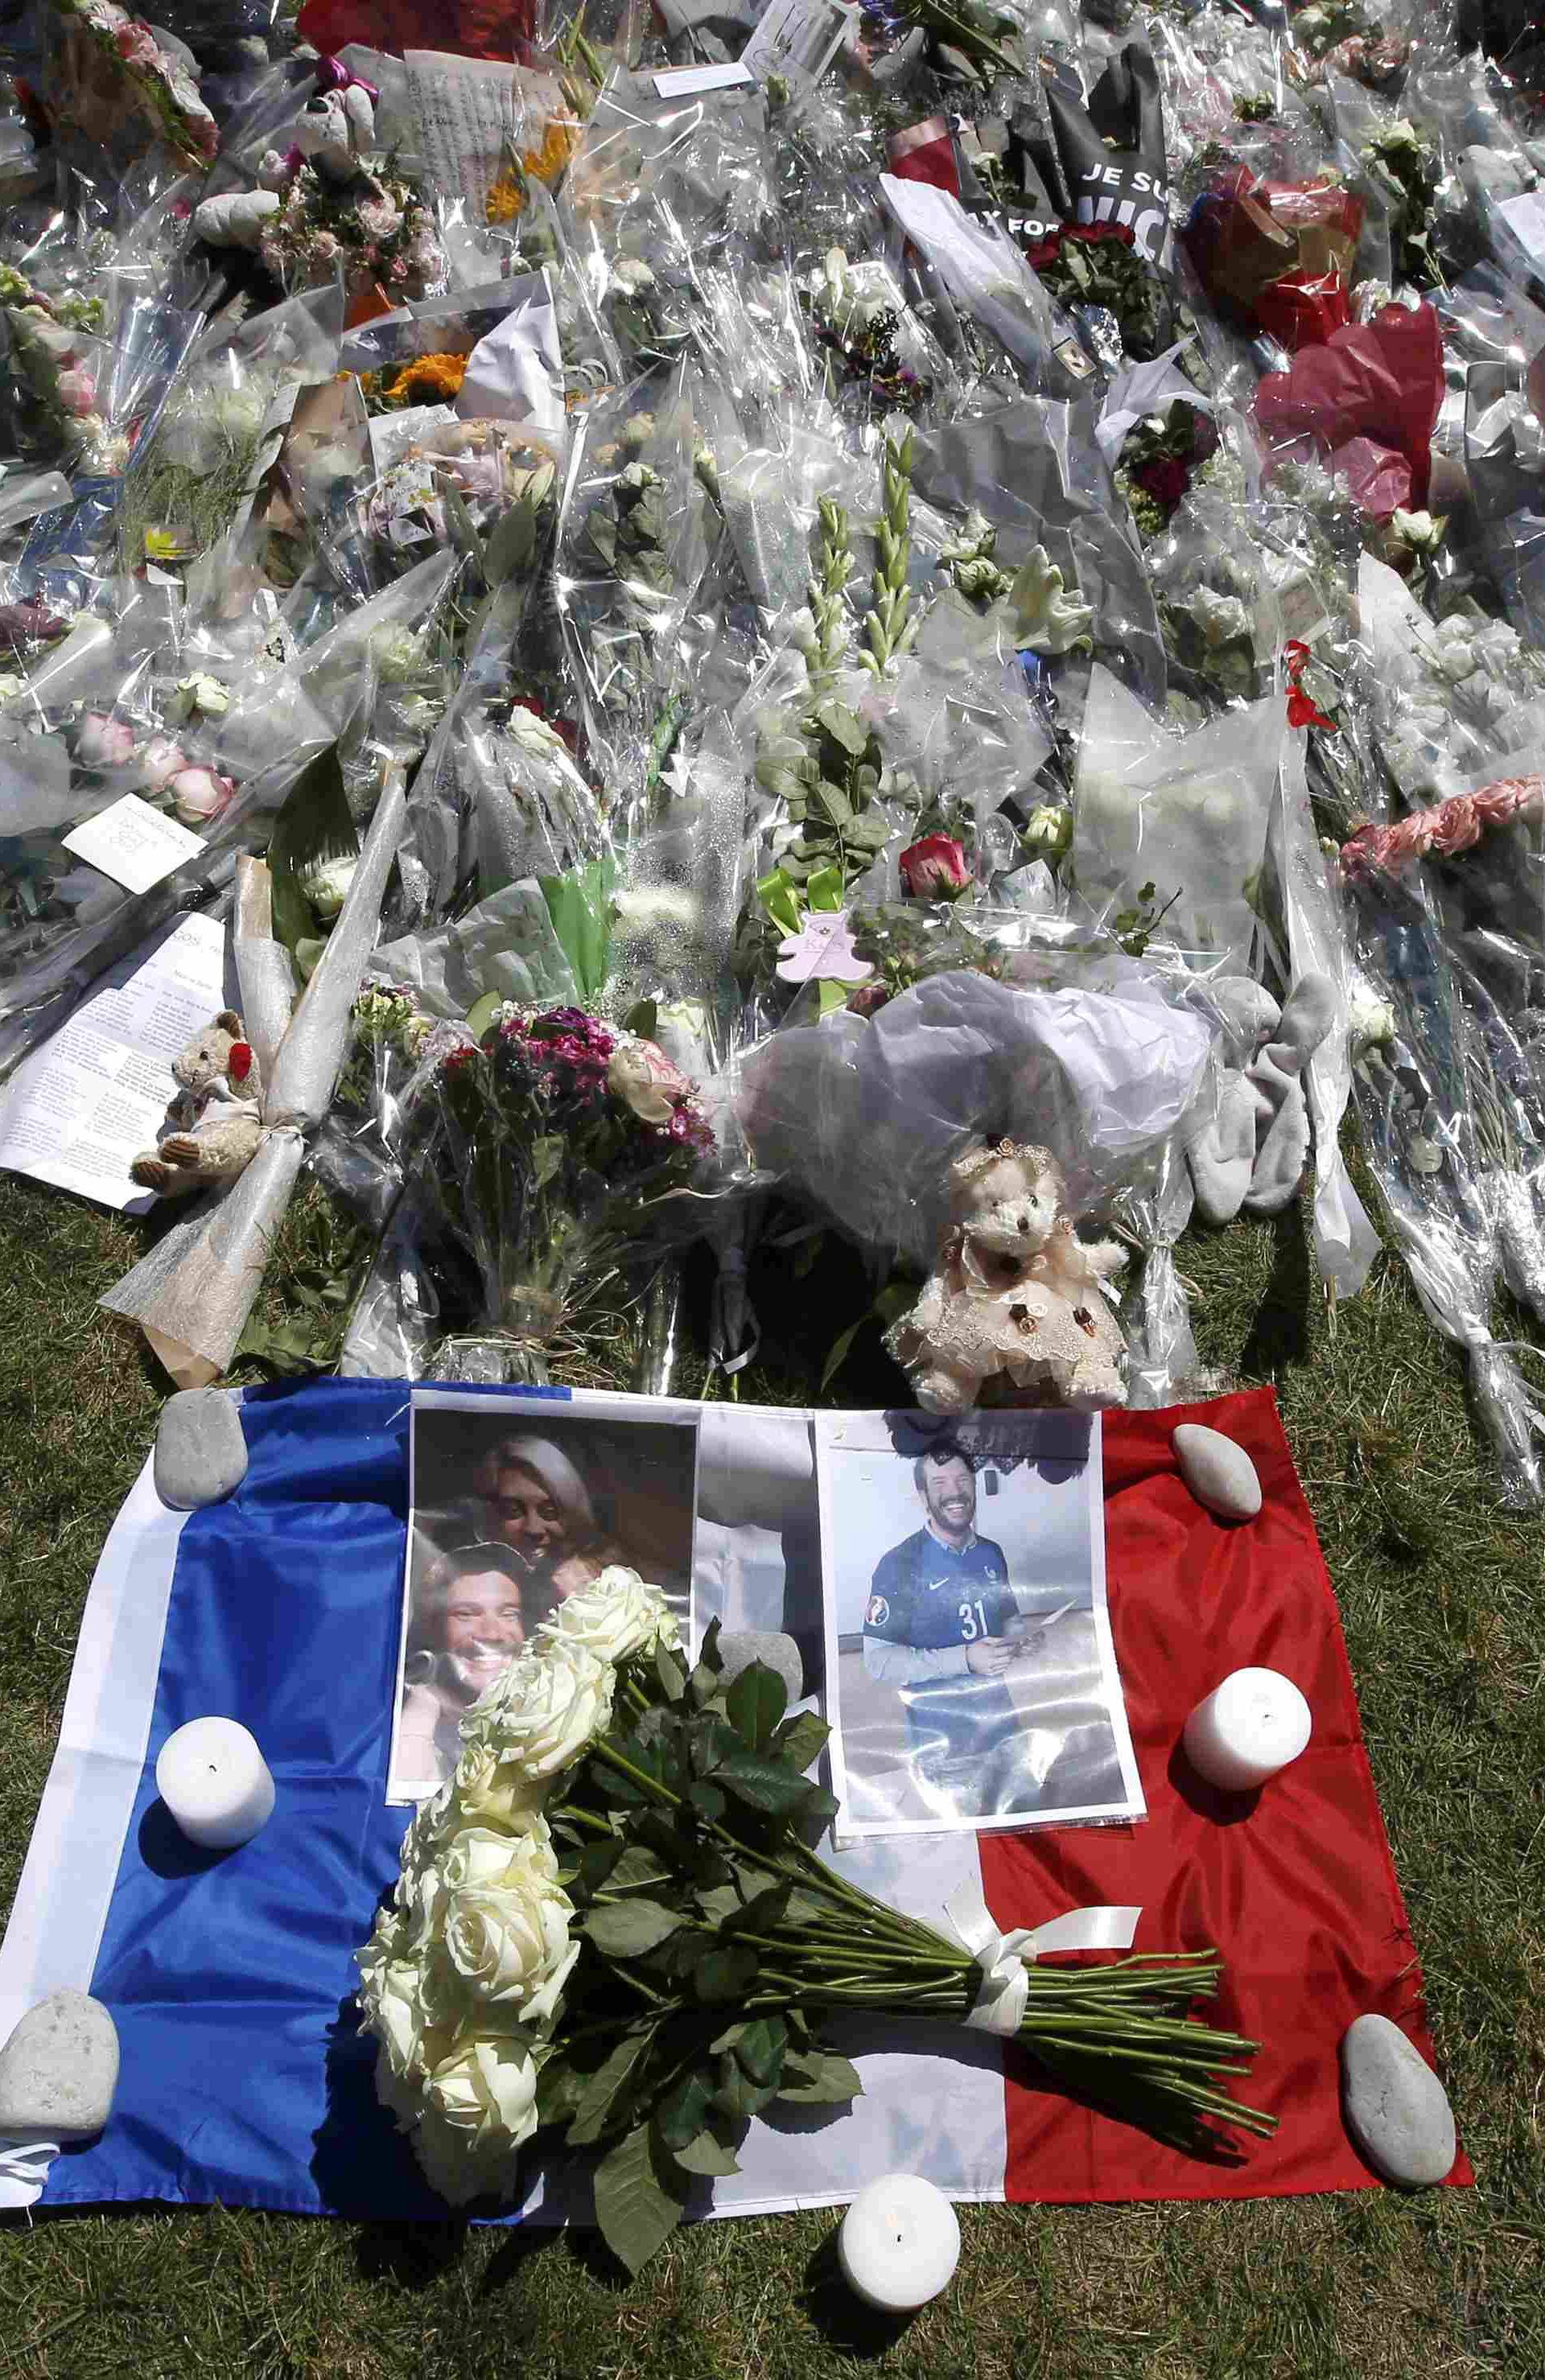 Pictures are seen on a French flag near tributes of flowers two days after an attack by the driver of a heavy truck who ran into a crowd on Bastille Day killing scores and injuring as many on the Promenade des Anglais, in Nice